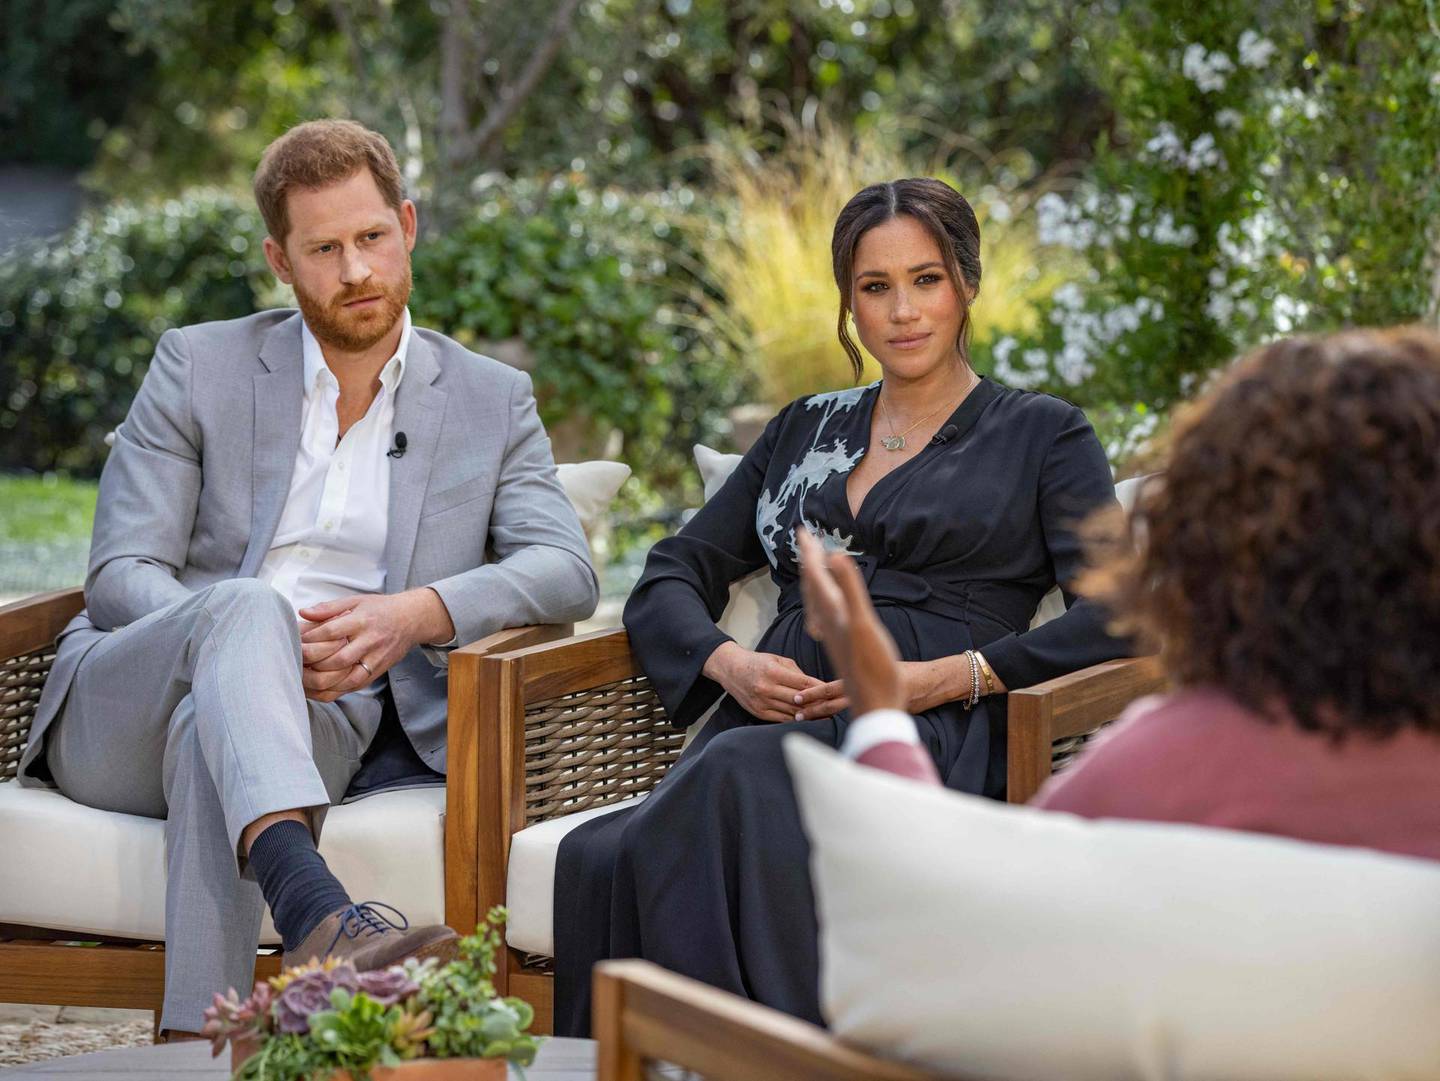 This undated image released March 7, 2021 courtesy of Harpo Productions shows Britain's Prince Harry (L) and his wife Meghan (C), Duchess of Sussex, in a conversation with US television host Oprah Winfrey. Britain's royal family on March 7, 2021 braced for further revelations from Prince Harry and his American wife, Meghan, as a week of transatlantic claim and counter-claim reaches a climax with the broadcast of their interview with Oprah Winfrey. The two-hour interview with the US TV queen is the biggest royal tell-all since Harry's mother princess Diana detailed her crumbling marriage to his father Prince Charles in 1995.  - RESTRICTED TO EDITORIAL USE - MANDATORY CREDIT "AFP PHOTO/ HARPO PRODUCTIONS -  Joe PUGLIESE" - NO MARKETING NO ADVERTISING CAMPAIGNS - DISTRIBUTED AS A SERVICE TO CLIENTS --- NO ARCHIVE ---

 / AFP / HARPO PRODUCTIONS / HARPO PRODUCTIONS / Joe PUGLIESE / RESTRICTED TO EDITORIAL USE - MANDATORY CREDIT "AFP PHOTO/ HARPO PRODUCTIONS -  Joe PUGLIESE" - NO MARKETING NO ADVERTISING CAMPAIGNS - DISTRIBUTED AS A SERVICE TO CLIENTS --- NO ARCHIVE ---

